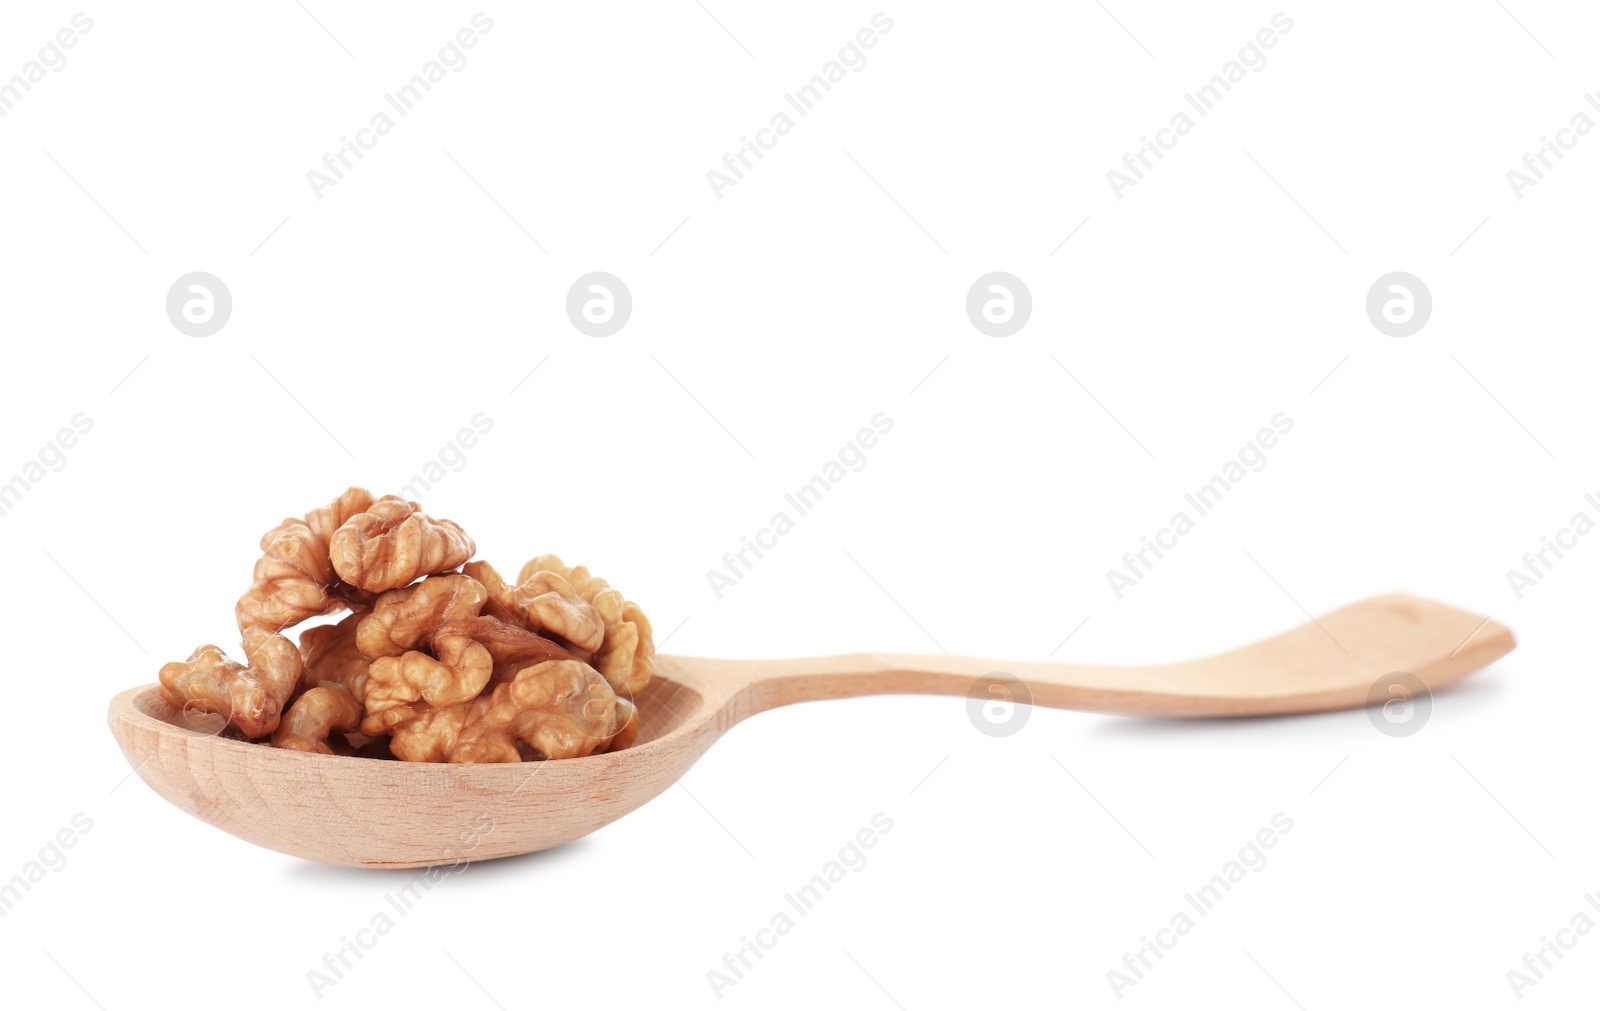 Photo of Wooden spoon with tasty walnuts on white background